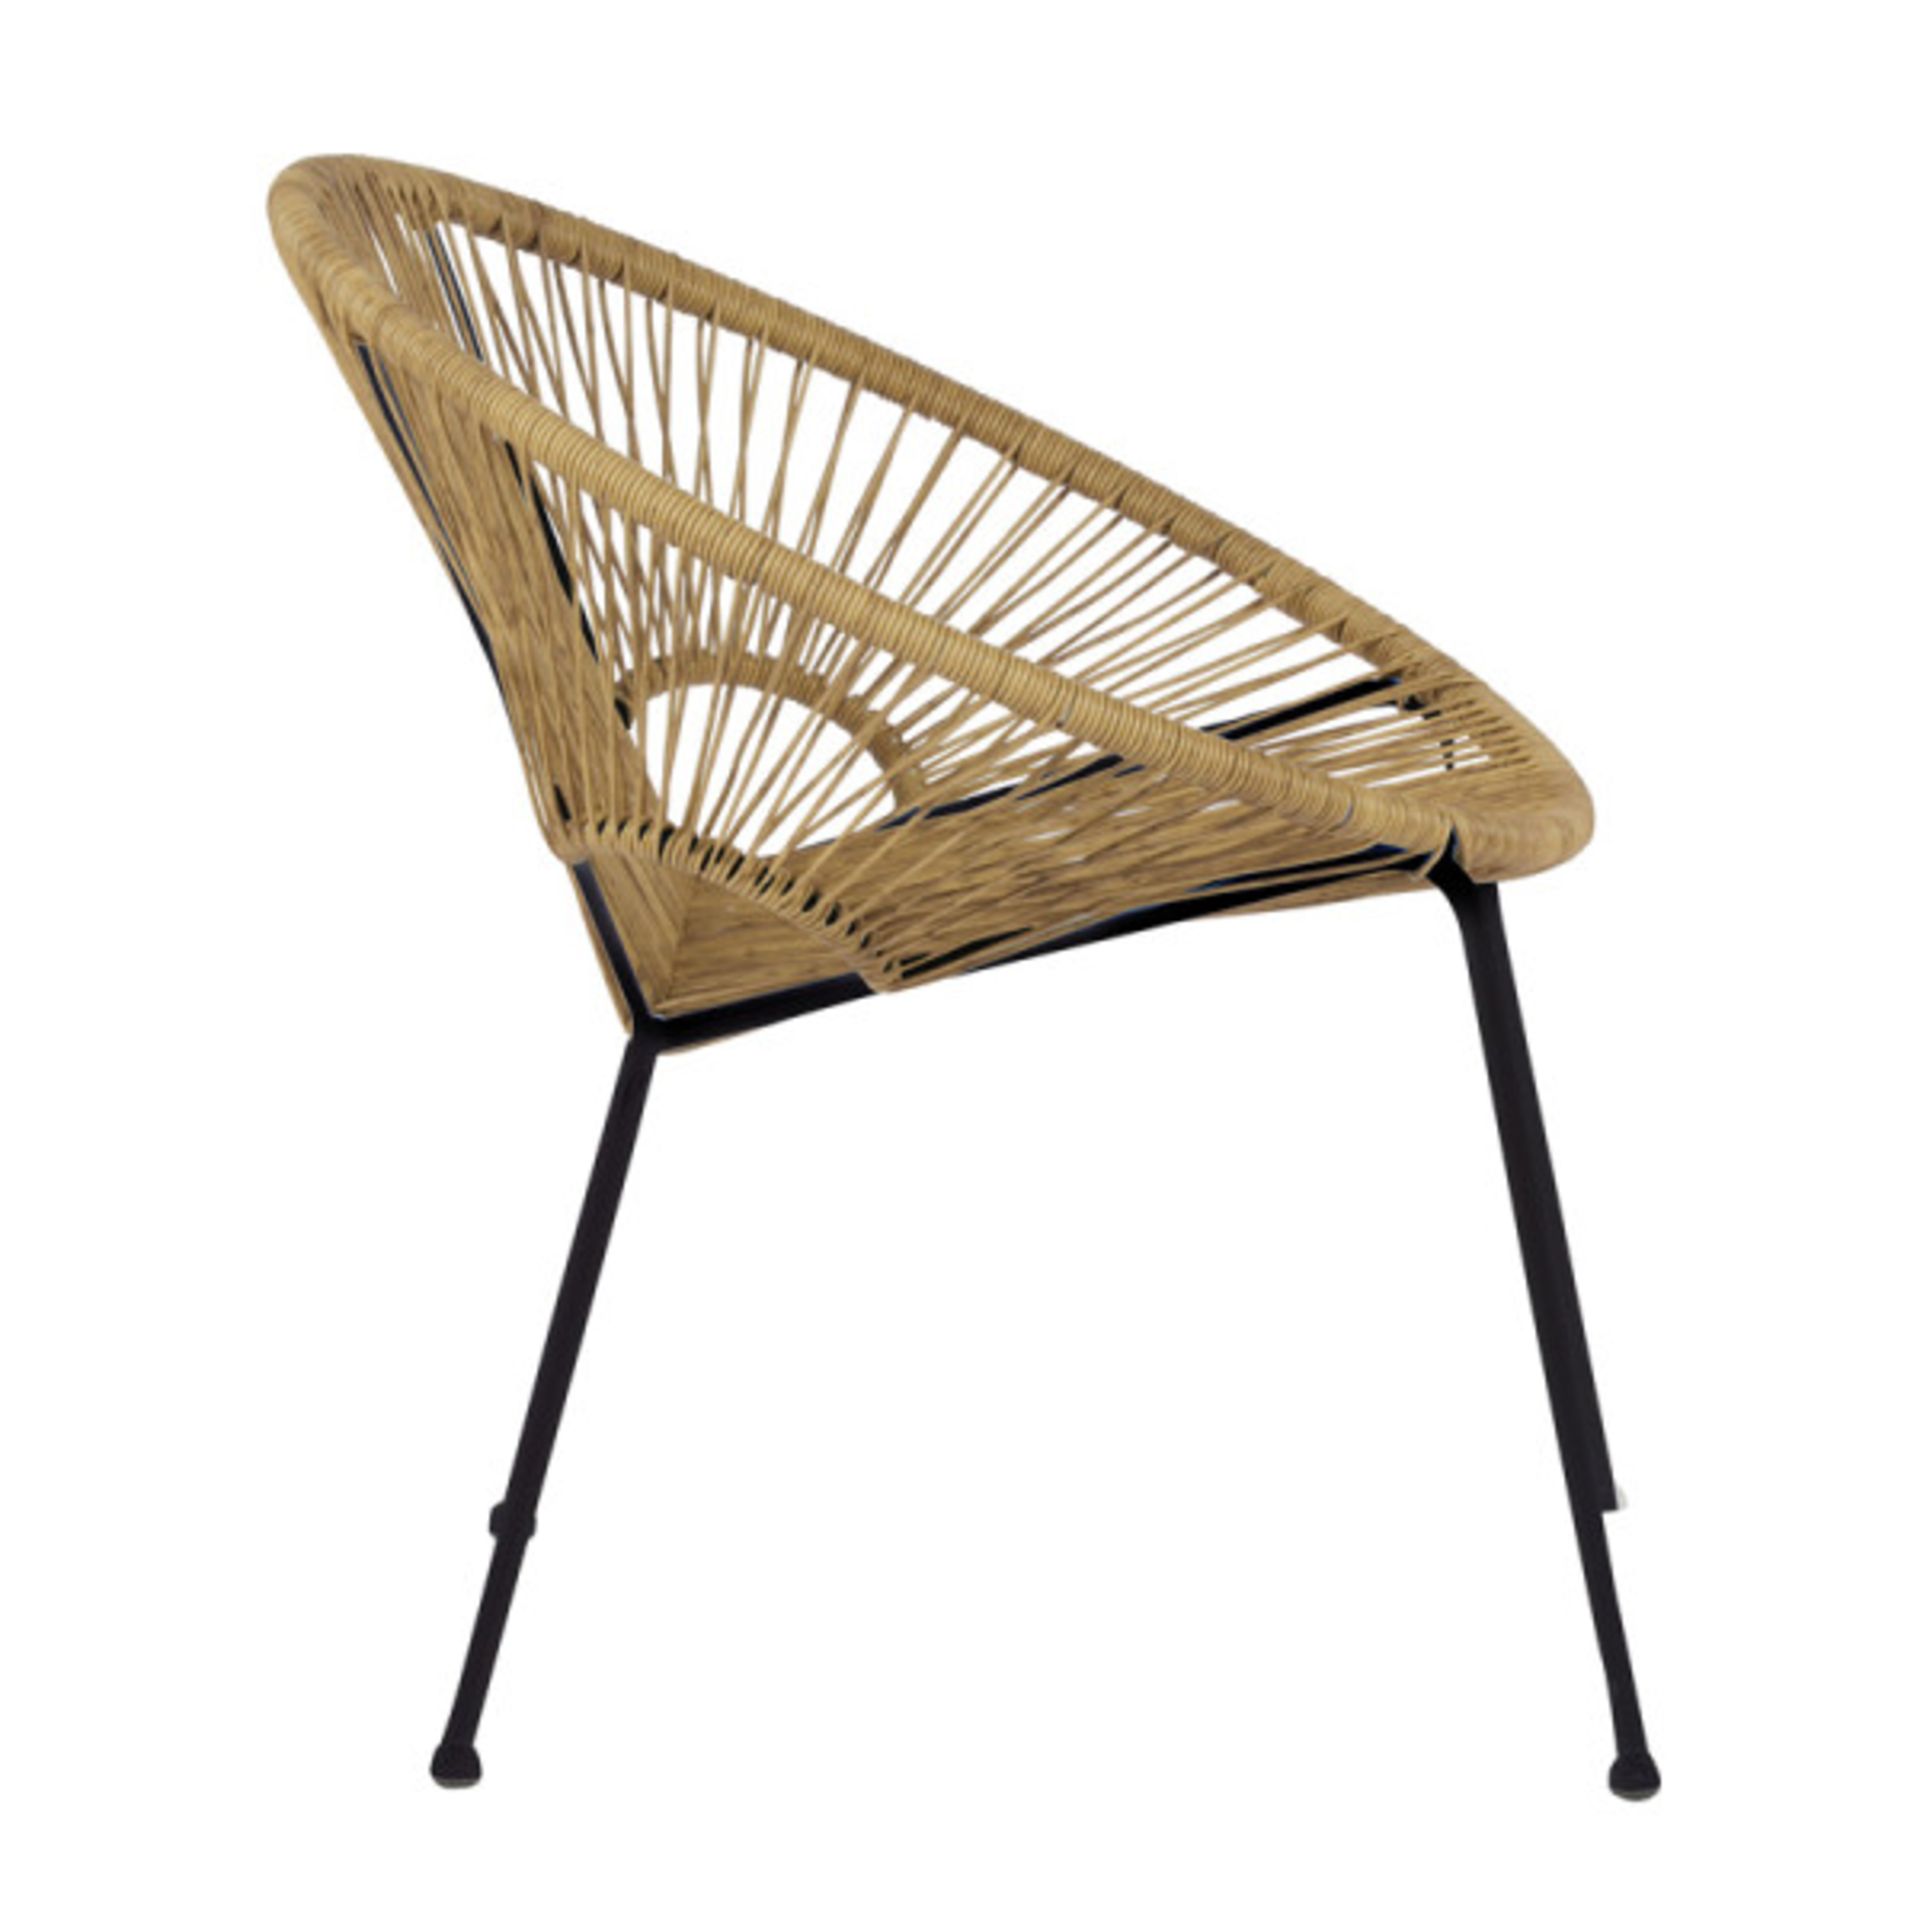 1 x  LUCCA Designer Rattan Chair By Woood Design - Dimensions: Height: 73cm x Length: 69cm x - Image 3 of 3